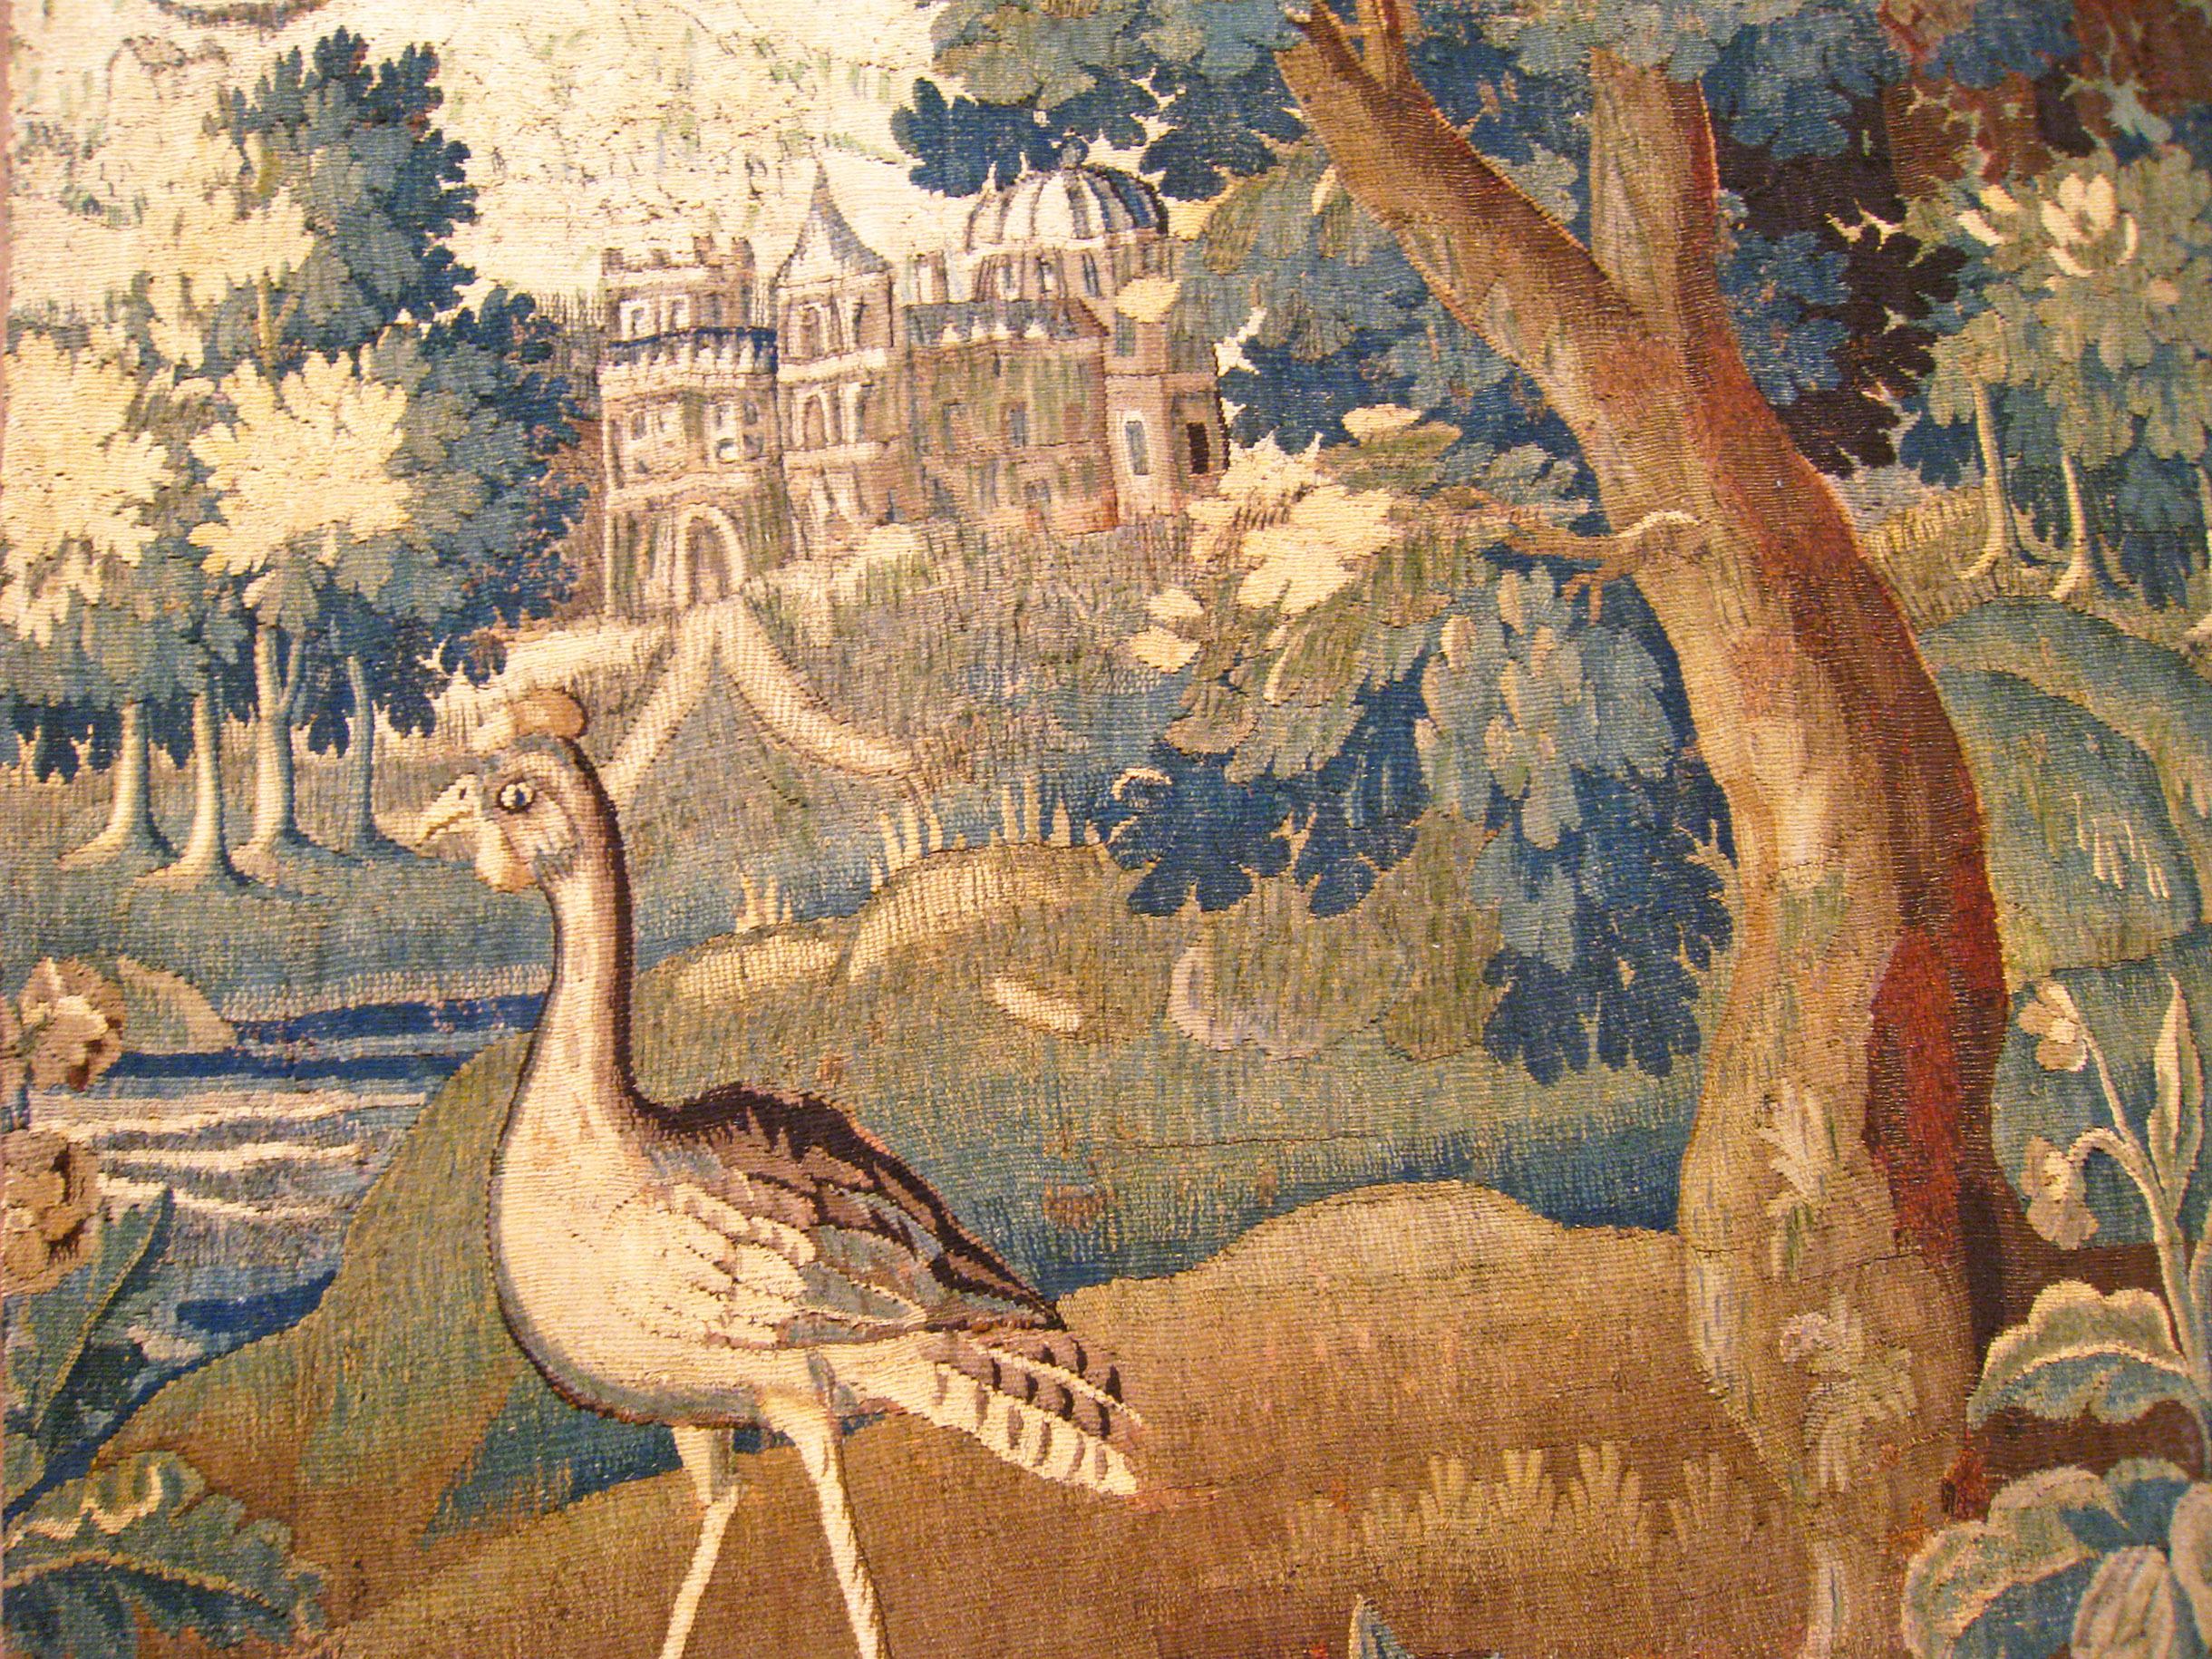 Hand-Woven 17th Century Antique Flemish Verdure Tapestry w/ Trees & bird For Sale